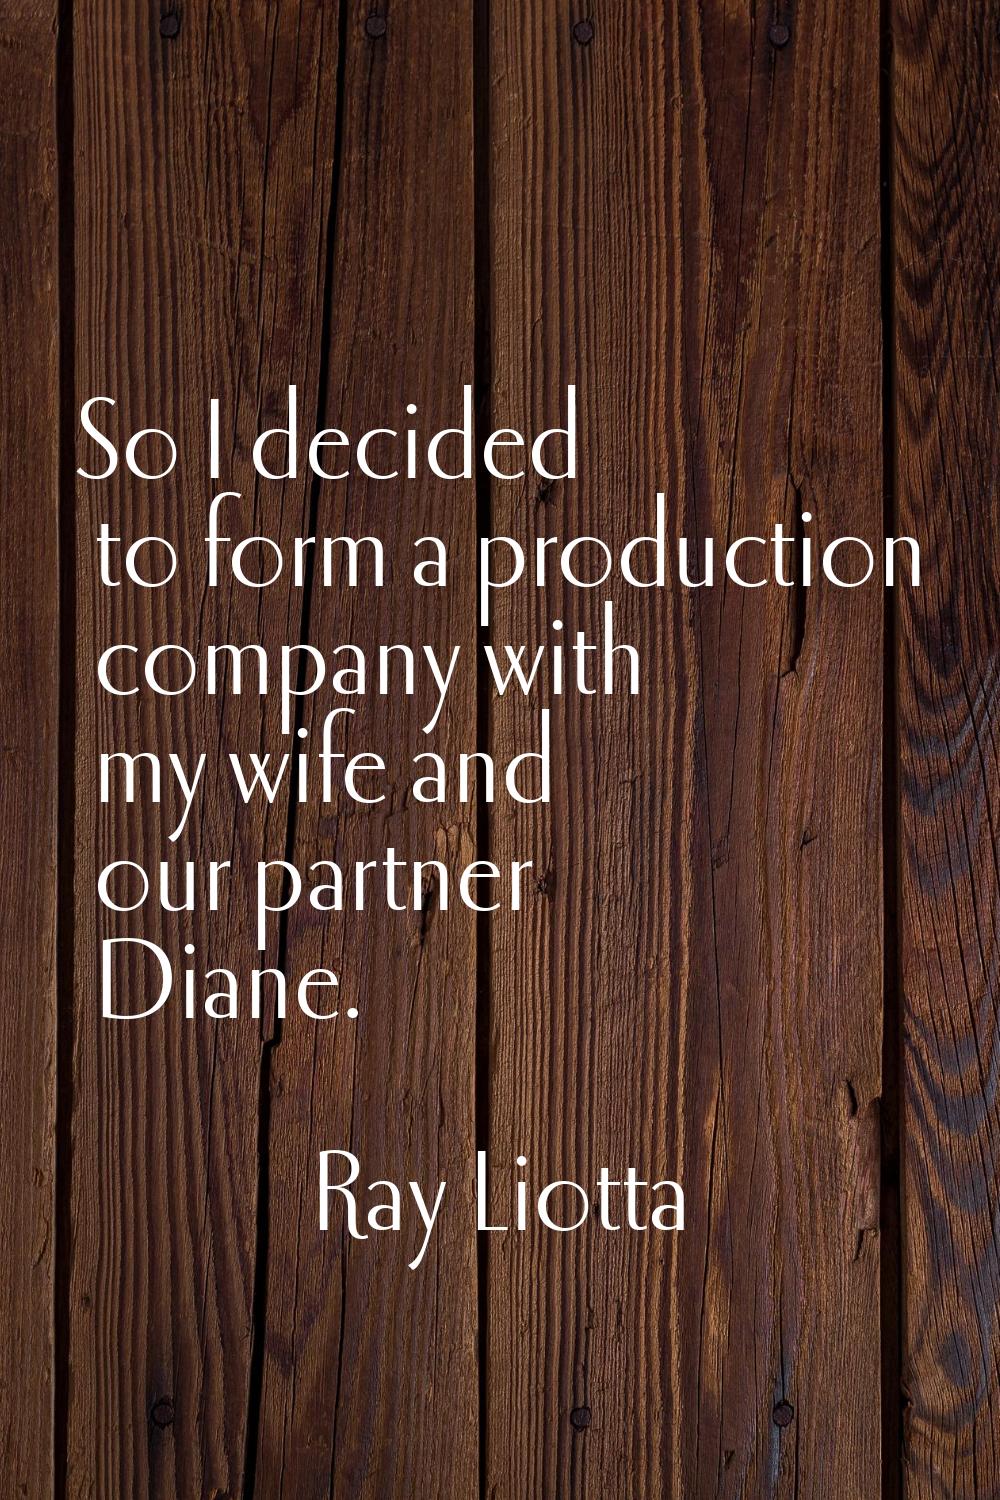 So I decided to form a production company with my wife and our partner Diane.